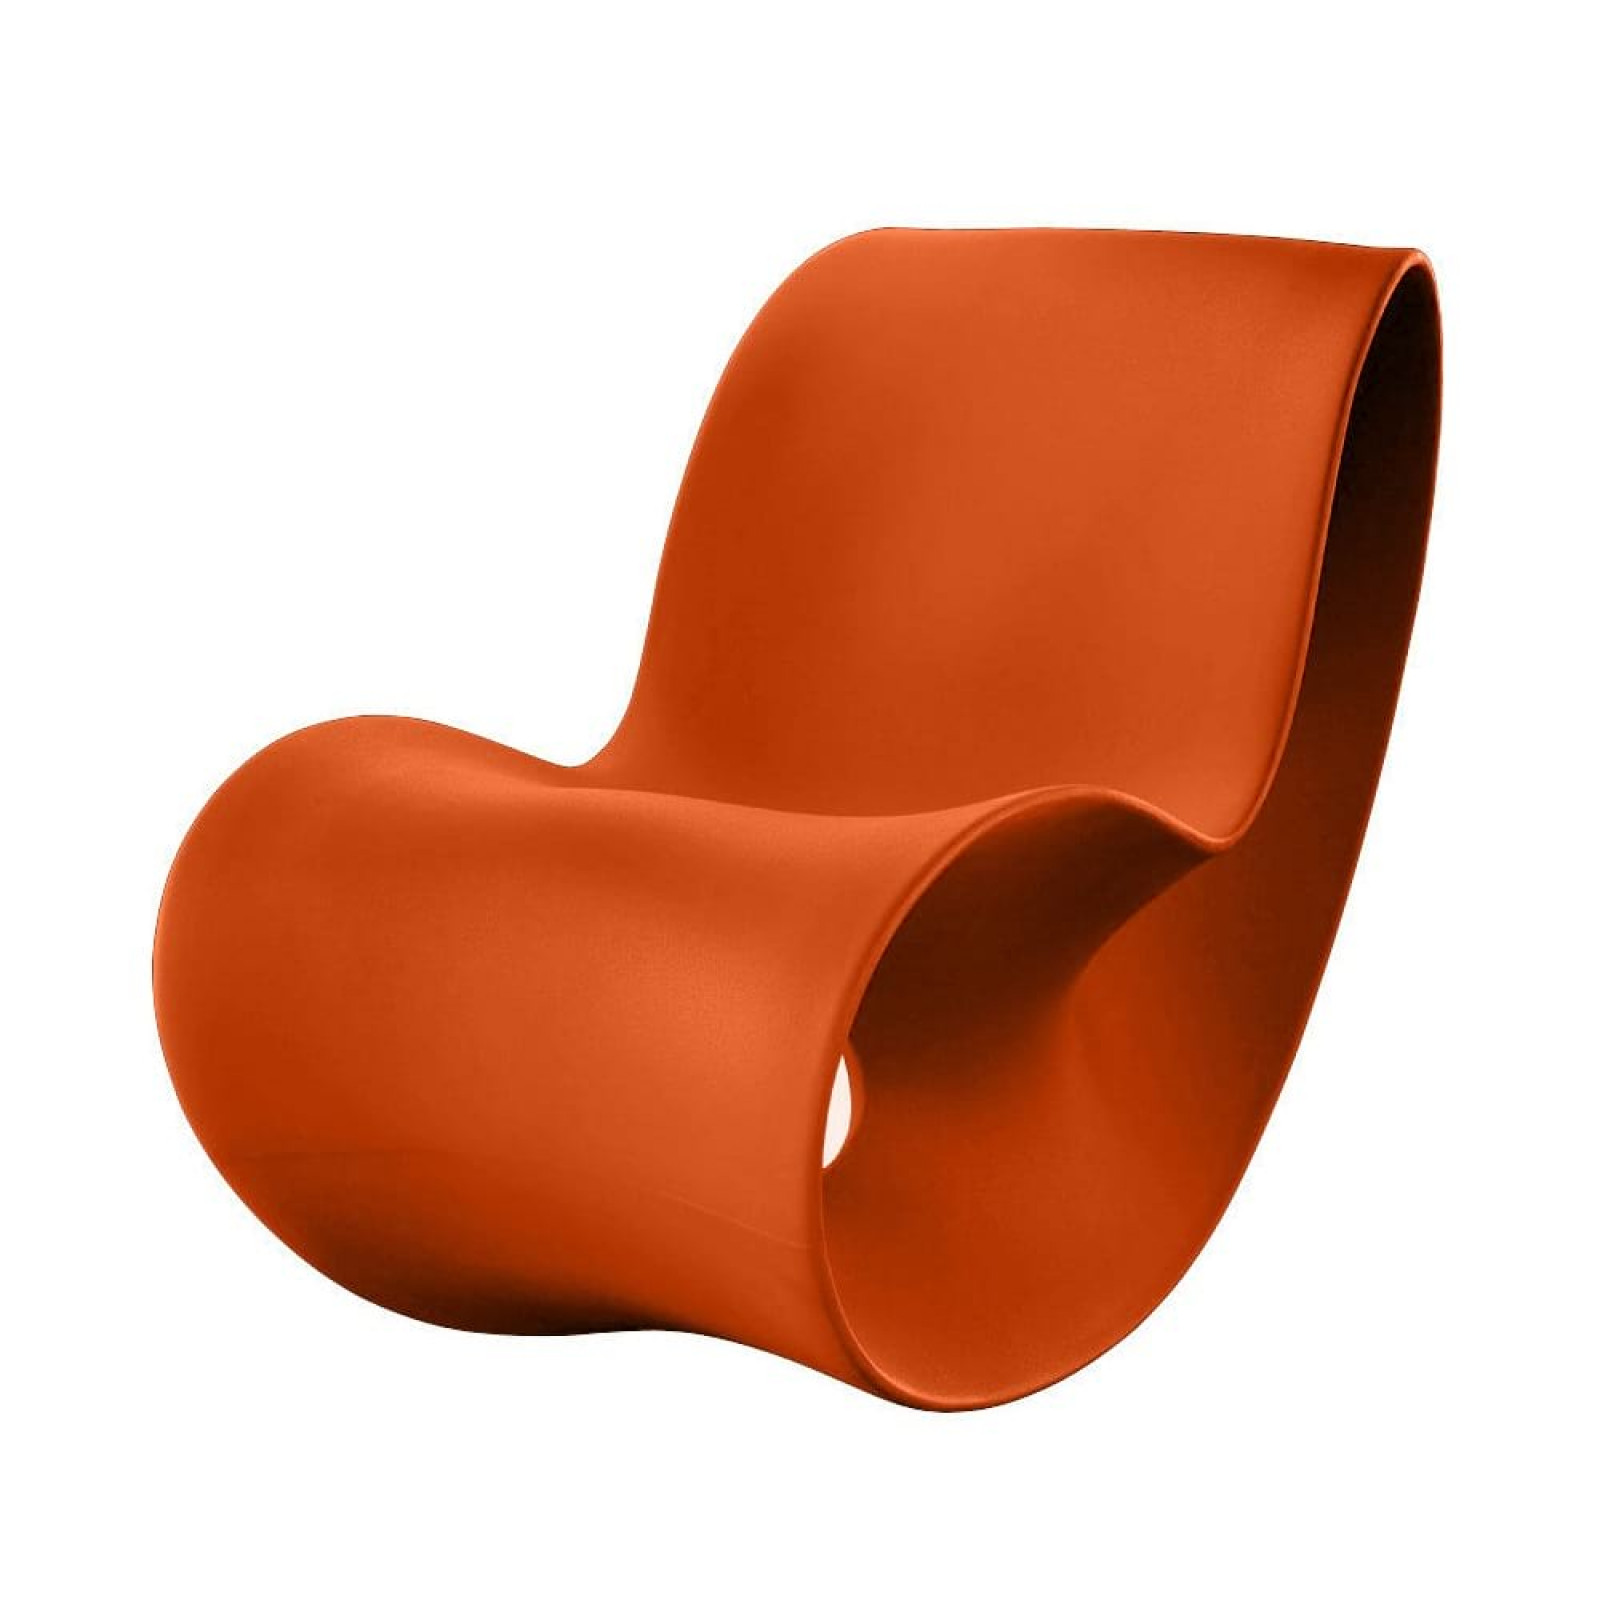 Voido Rocking Chair (5 colors)